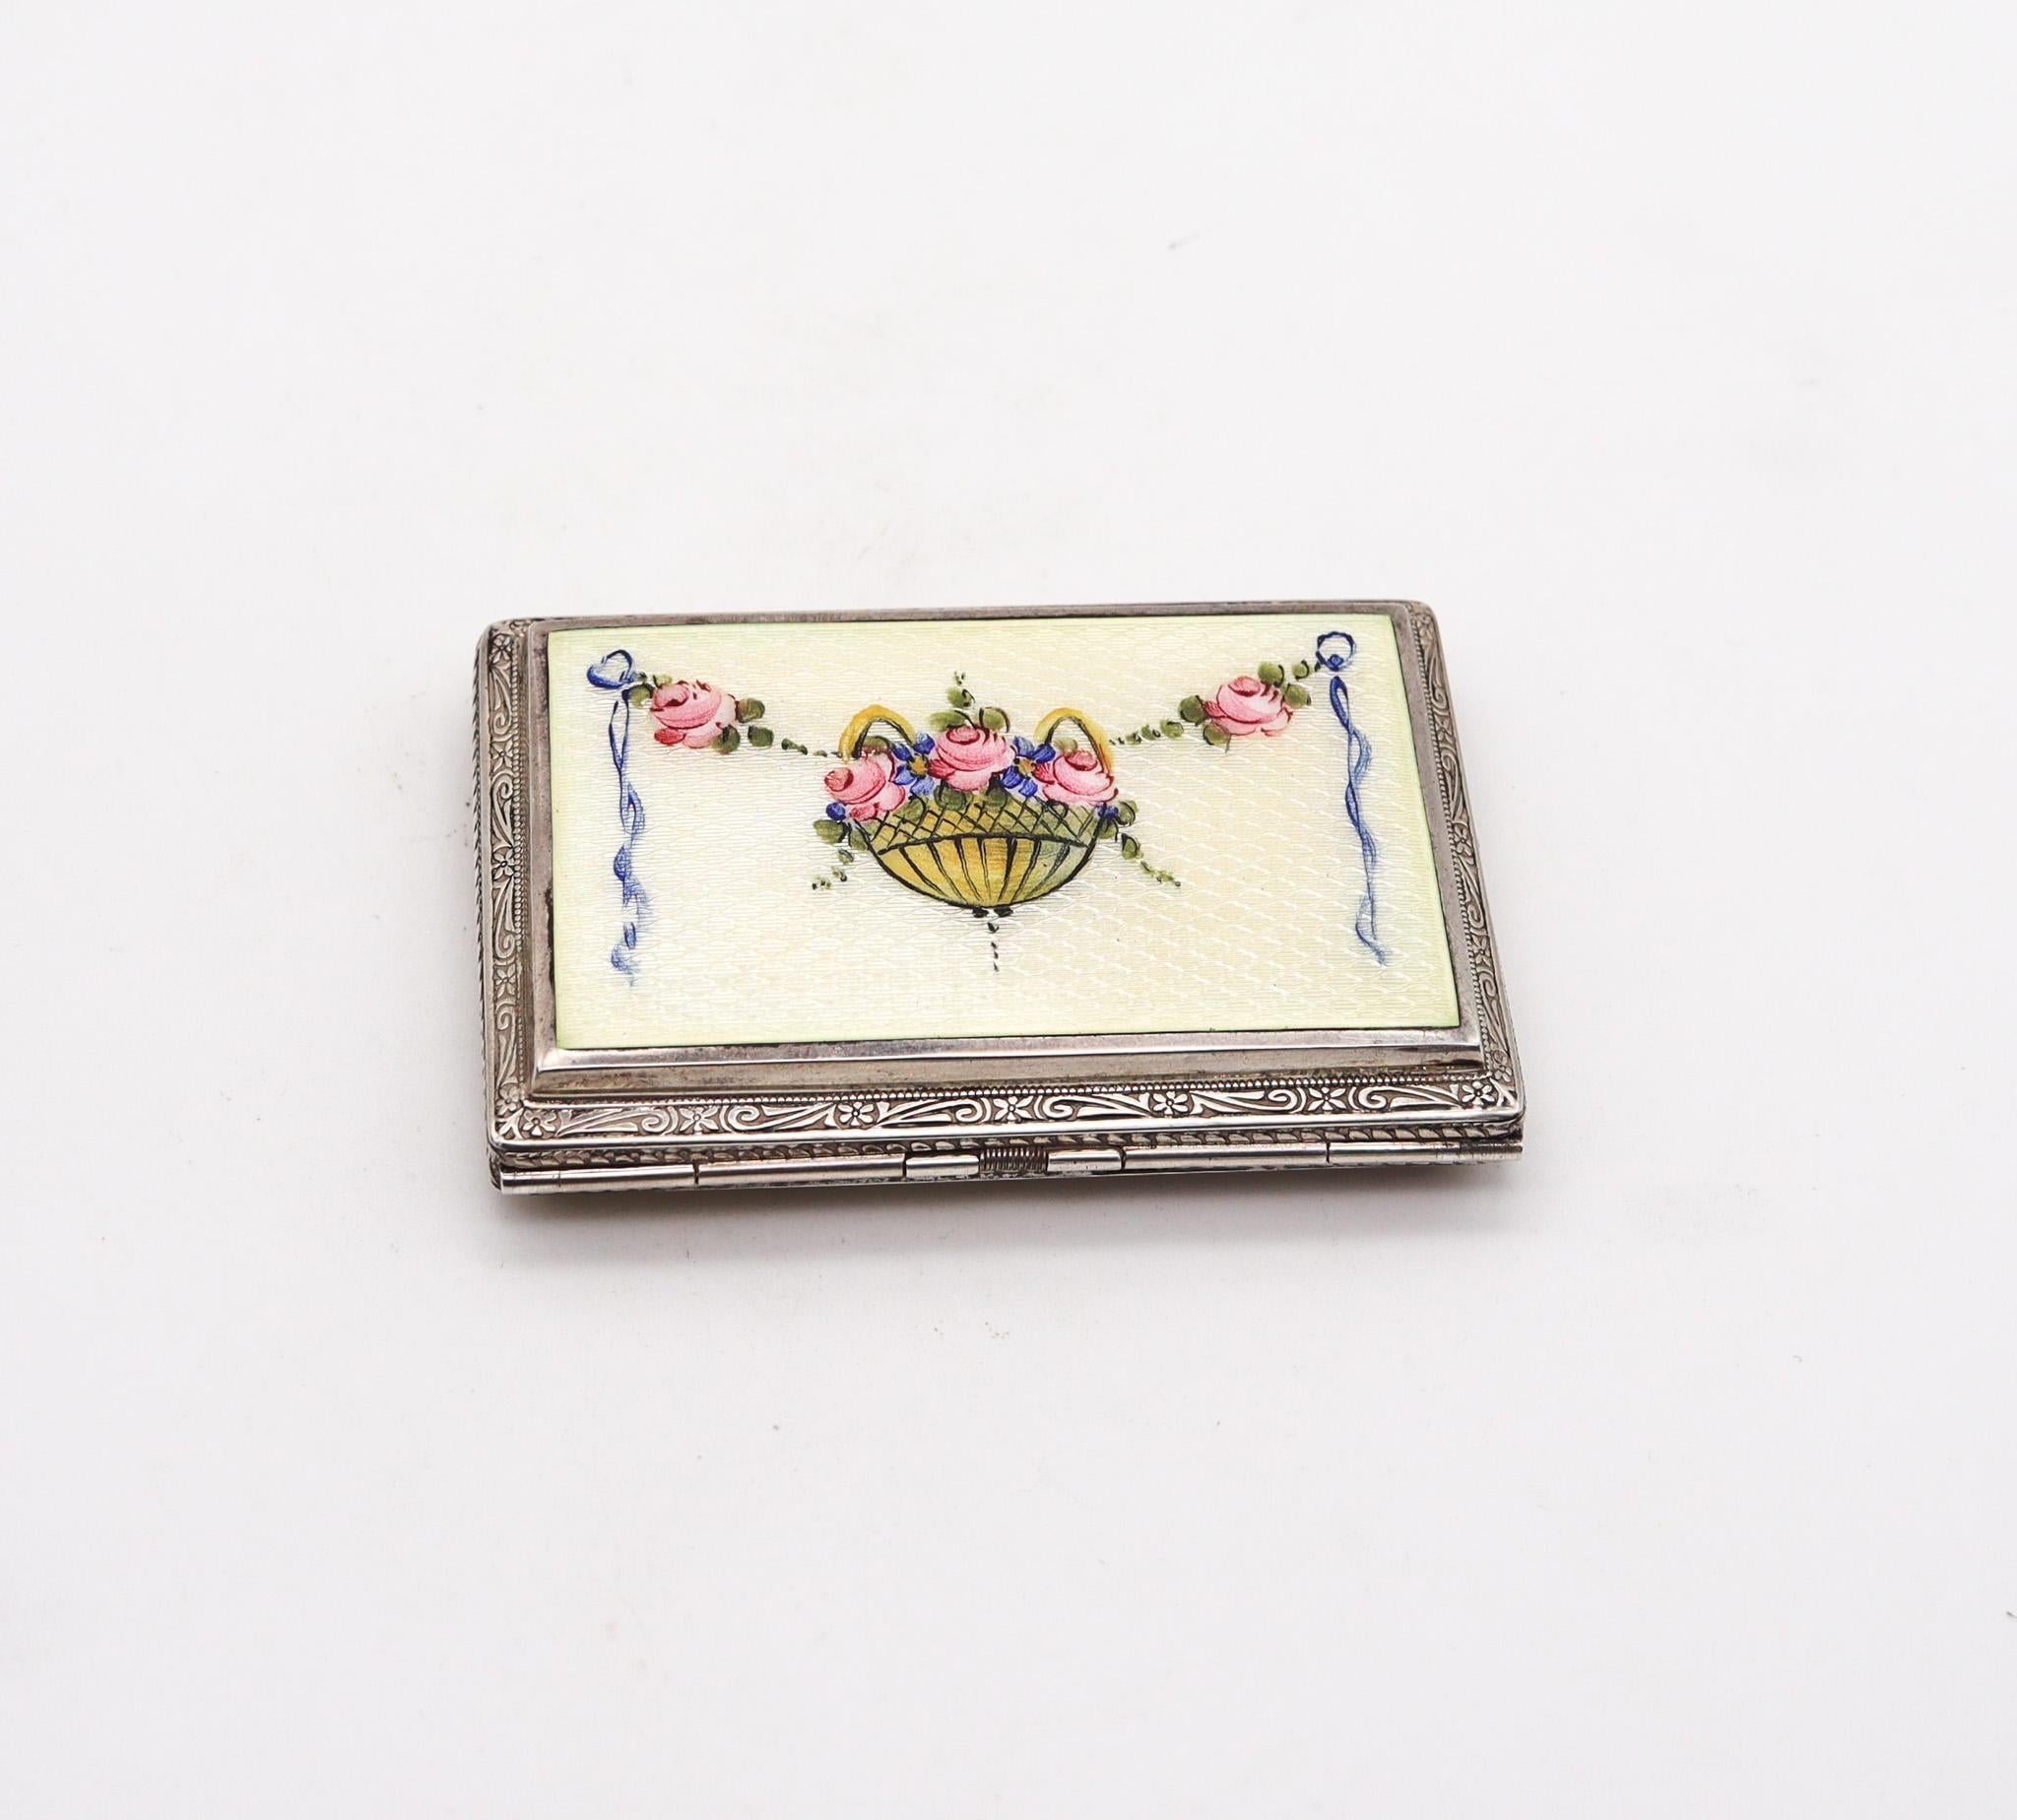 Art deco case designed by Ripley & Gowan Company.

Beautiful early 20th century enamel box, created by the Ripley & Gowan Company circa 1920. This beautiful art deco box was carefully crafted with impeccable details in solid .925/.999 standard